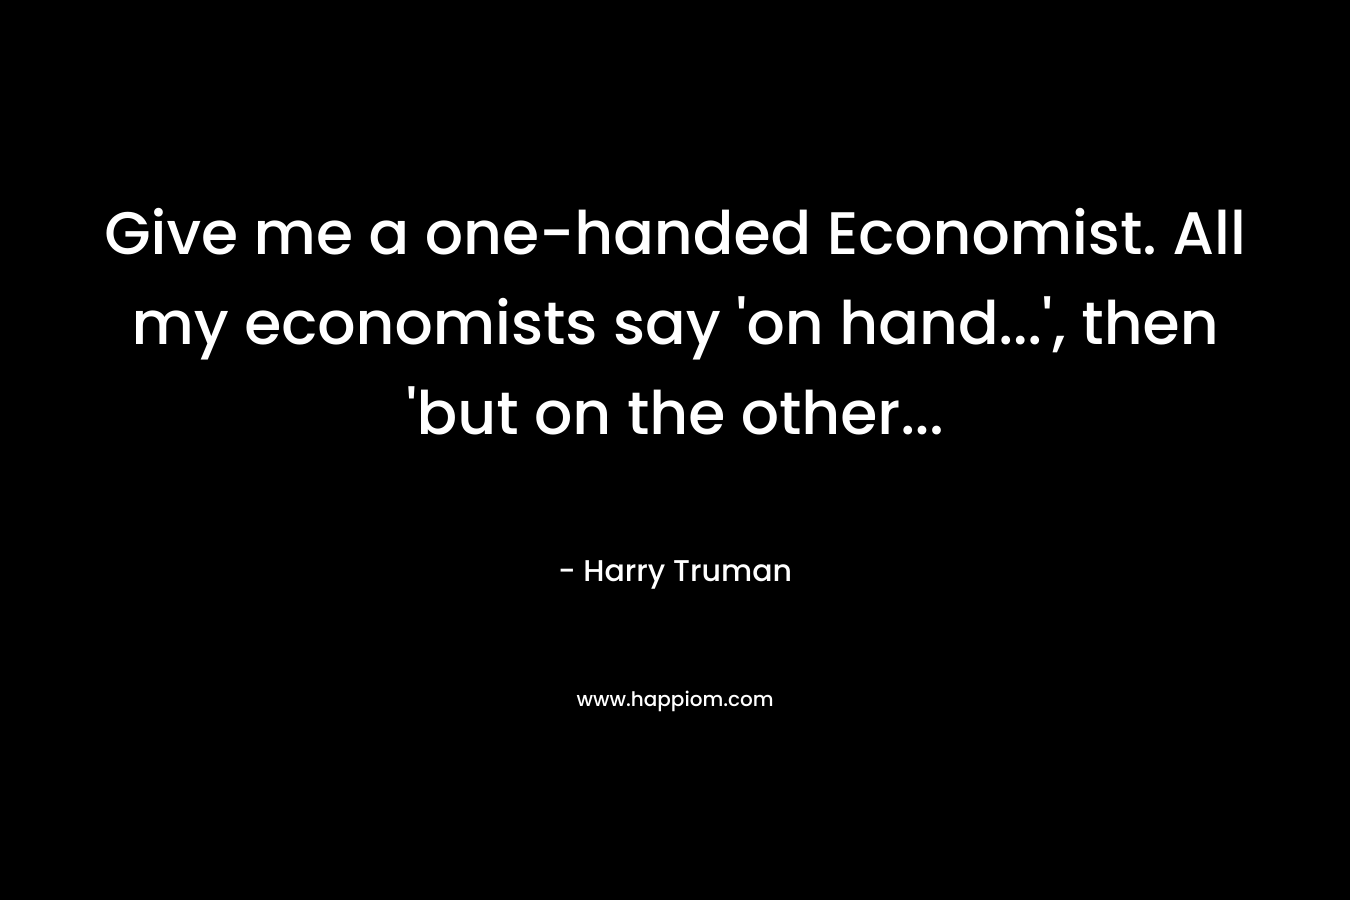 Give me a one-handed Economist. All my economists say ‘on hand…’, then ‘but on the other… – Harry Truman